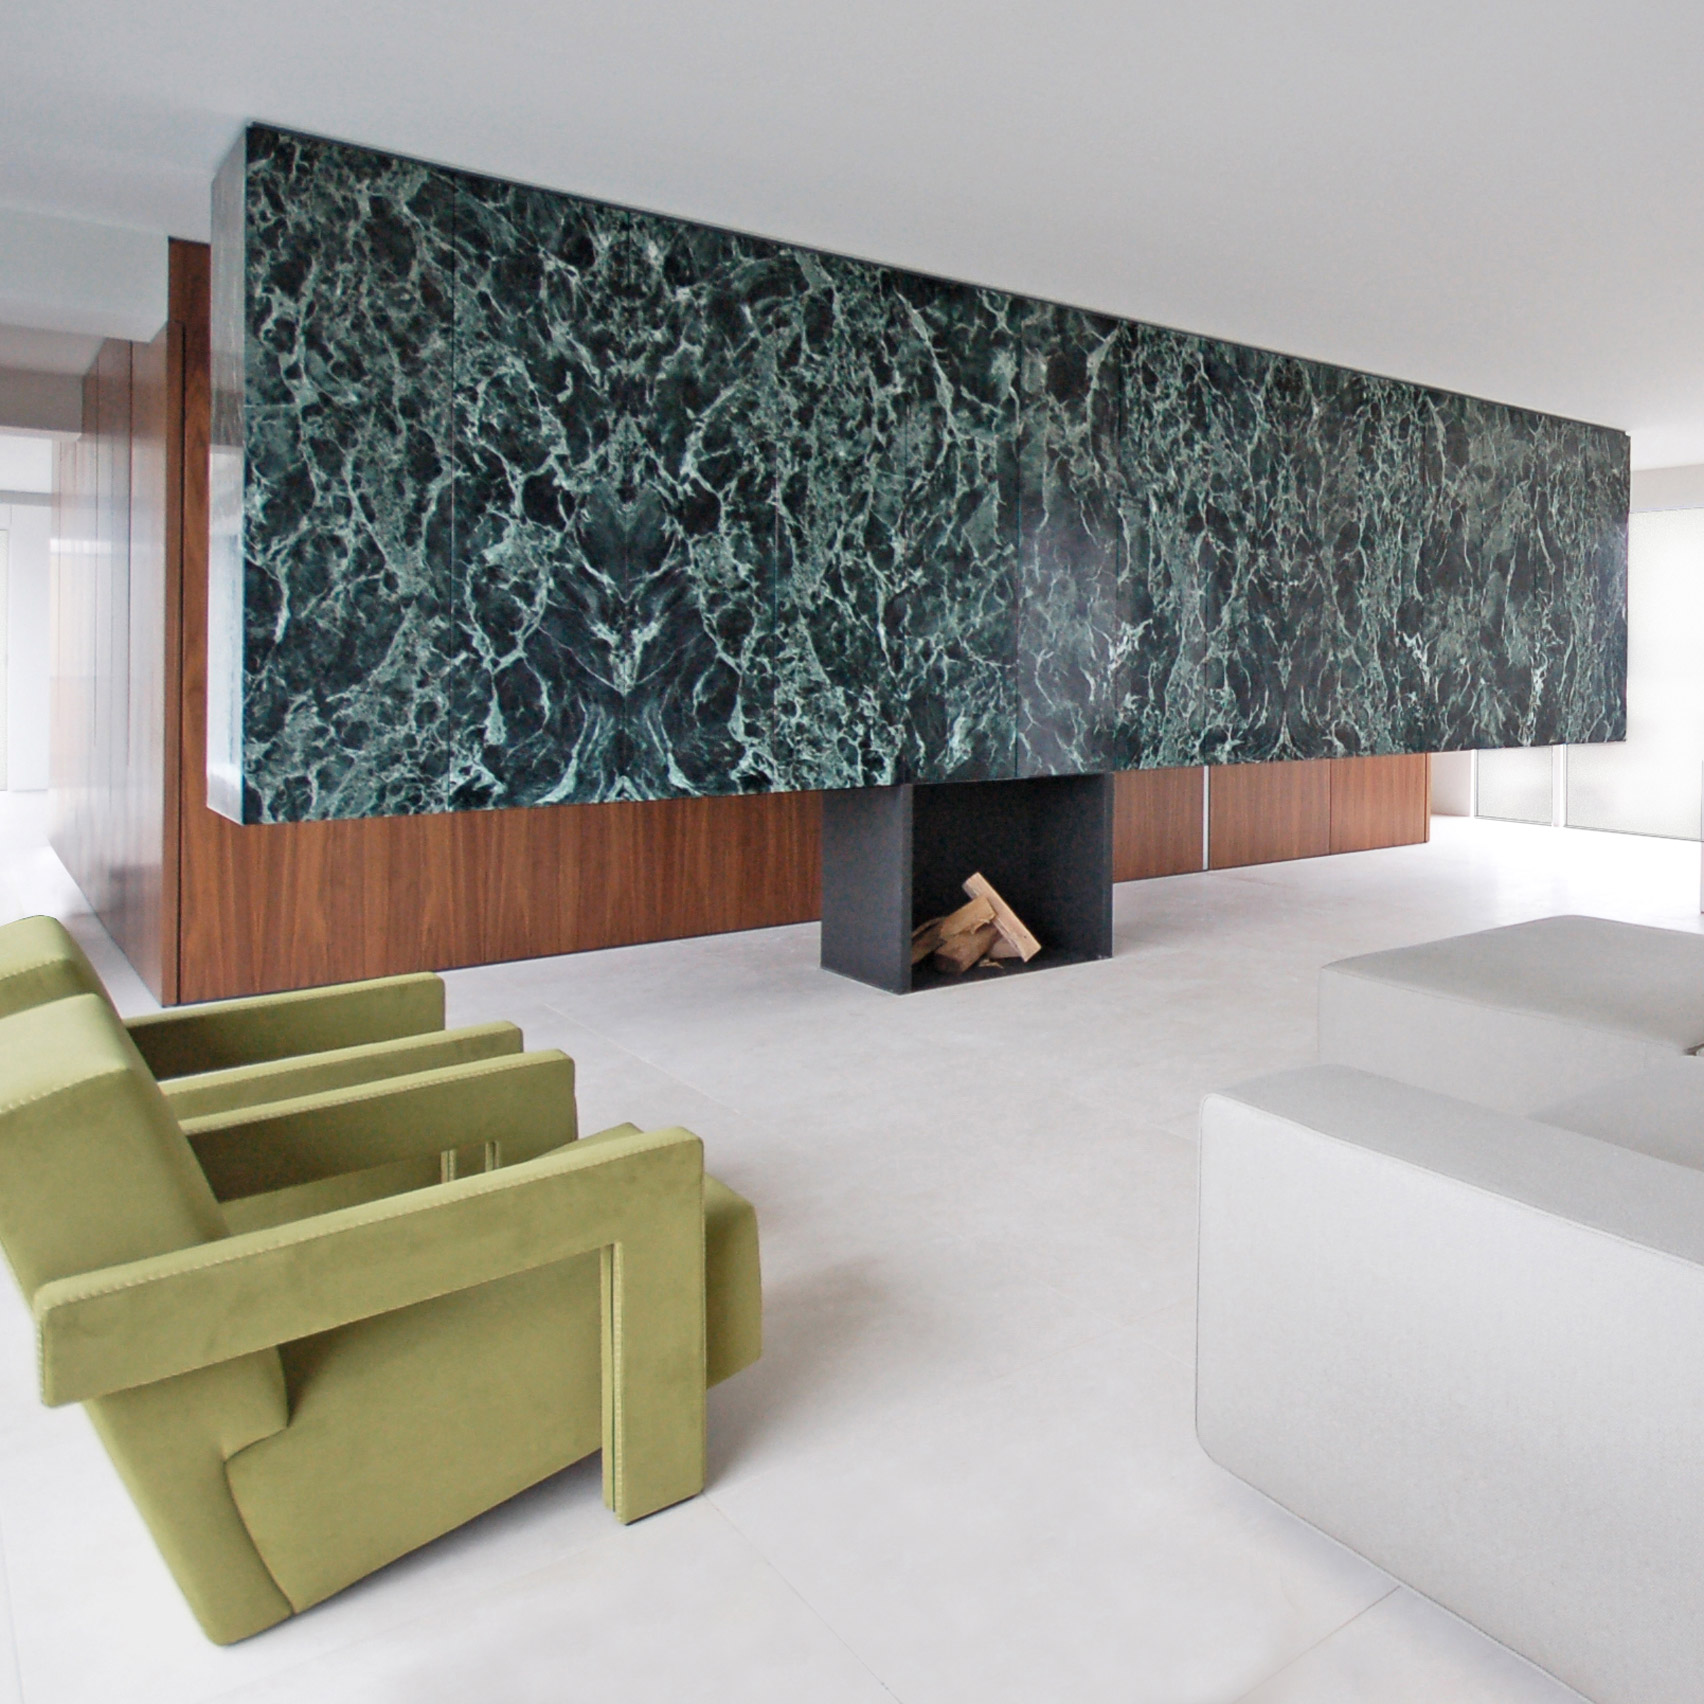 10 contemporary homes that make clever use of marble